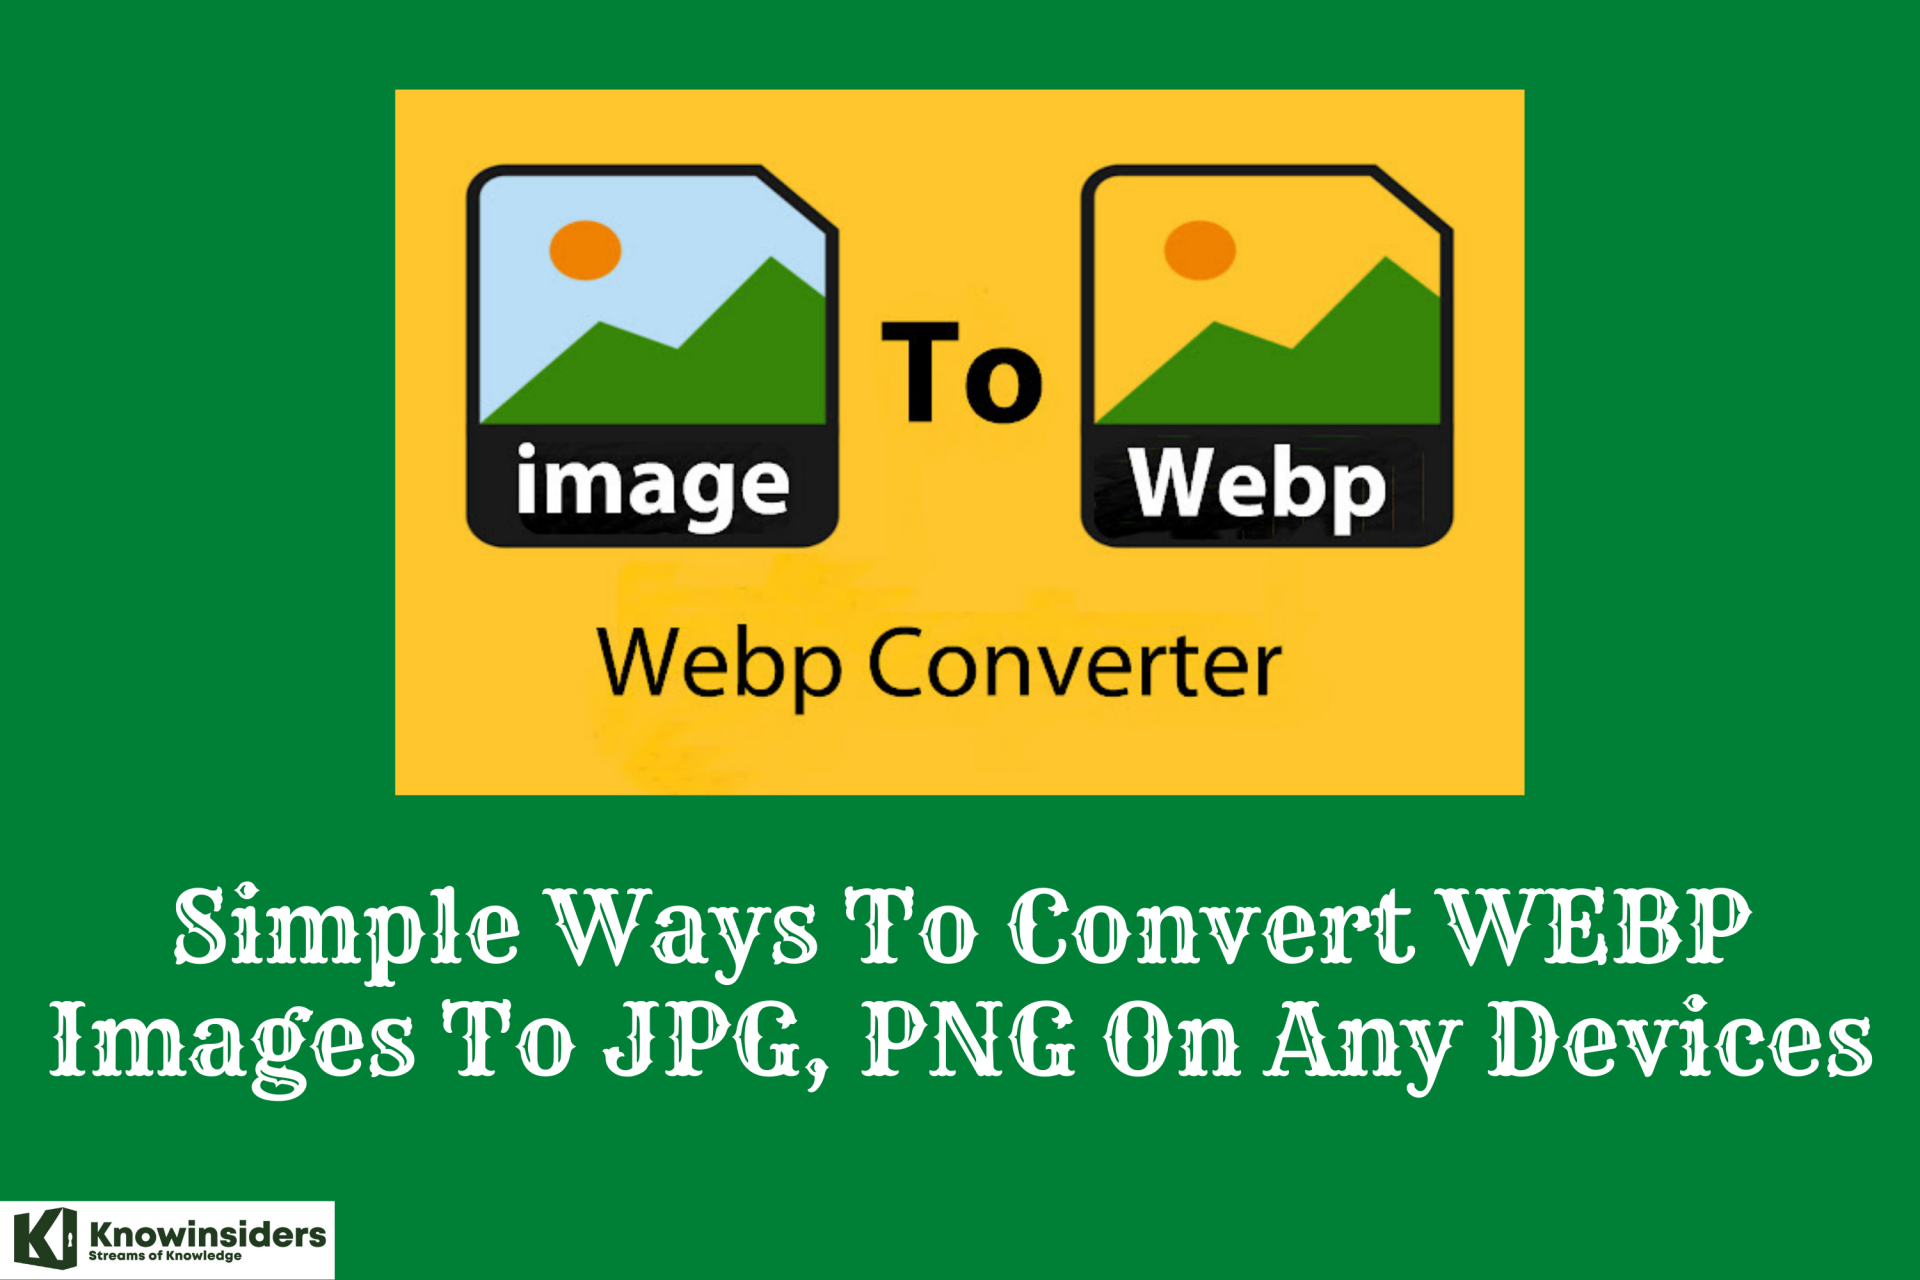 Simple Ways To Convert WEBP Images To JPG, PNG On Any Devices